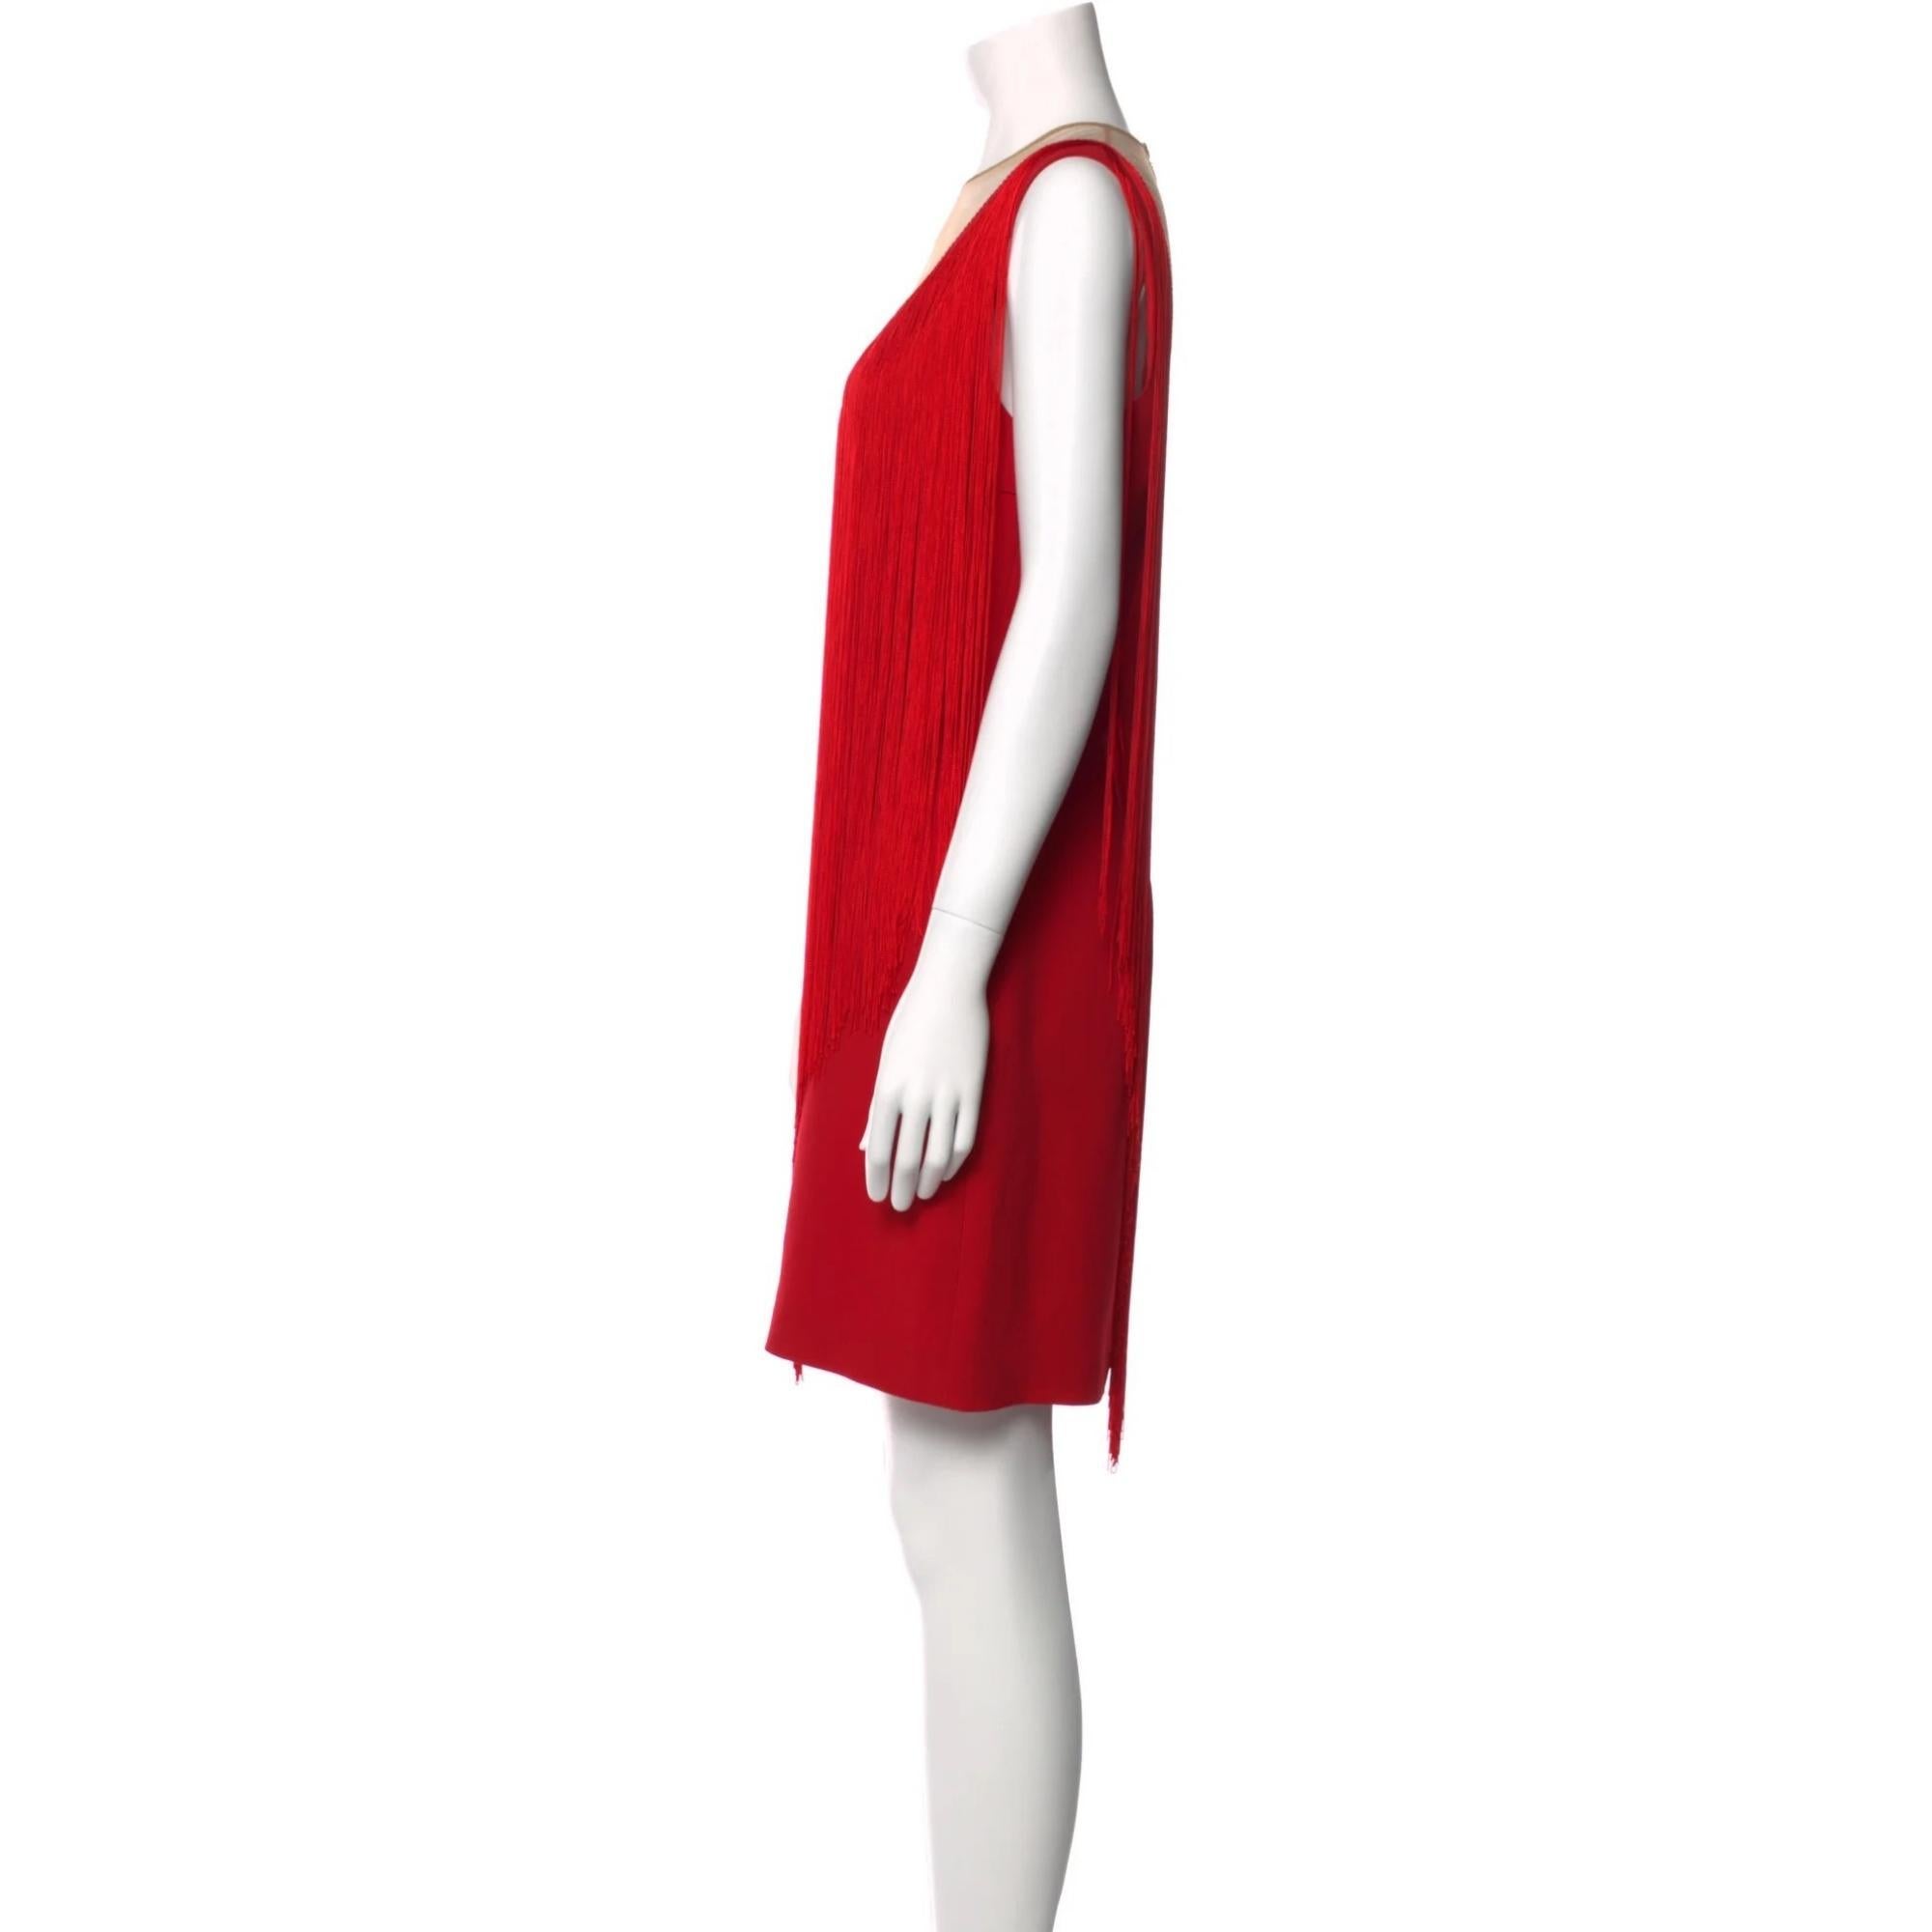 Stella McCartney Shift Dress. Red. Fringe Trim Accent. Sleeveless with Crew Neck. Concealed Zip Closure at Back.

COLOR: Red
MATERIAL: 49% Viscose, 48% Acetate, 3% Elastane; Lining 100% Silk; Combo 100% Polyamide; Combo 2 100% Viscose

SIZE: US6,